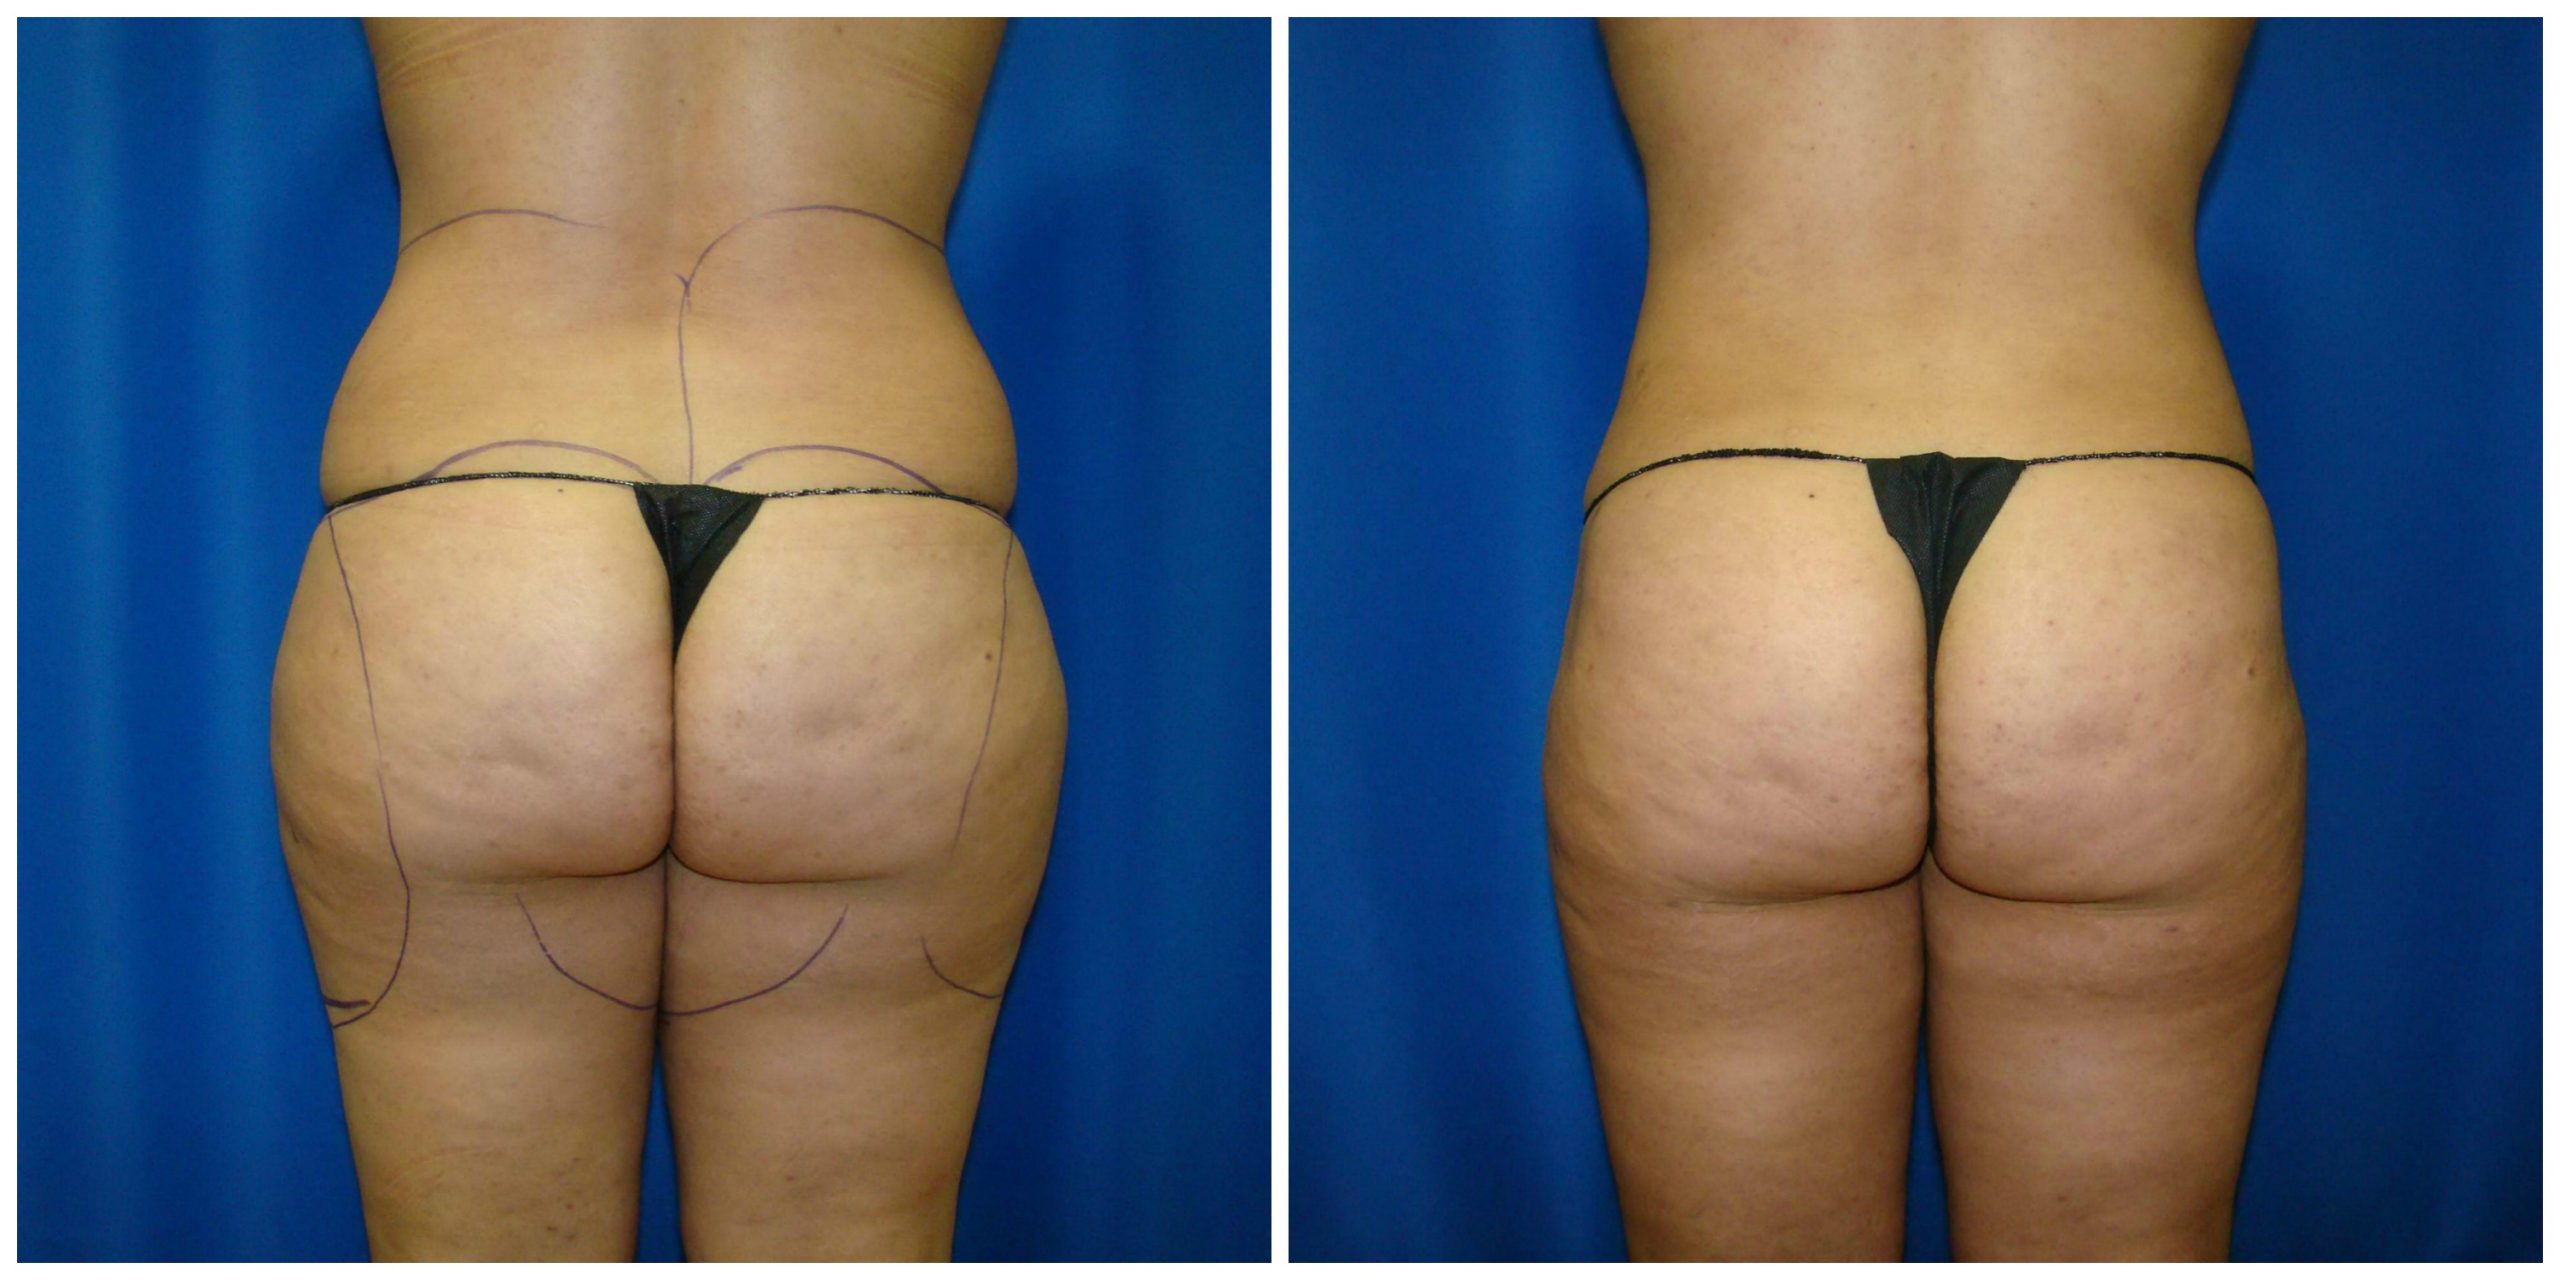 3 Areas To Do Liposuction On To Completely Transform Your Body